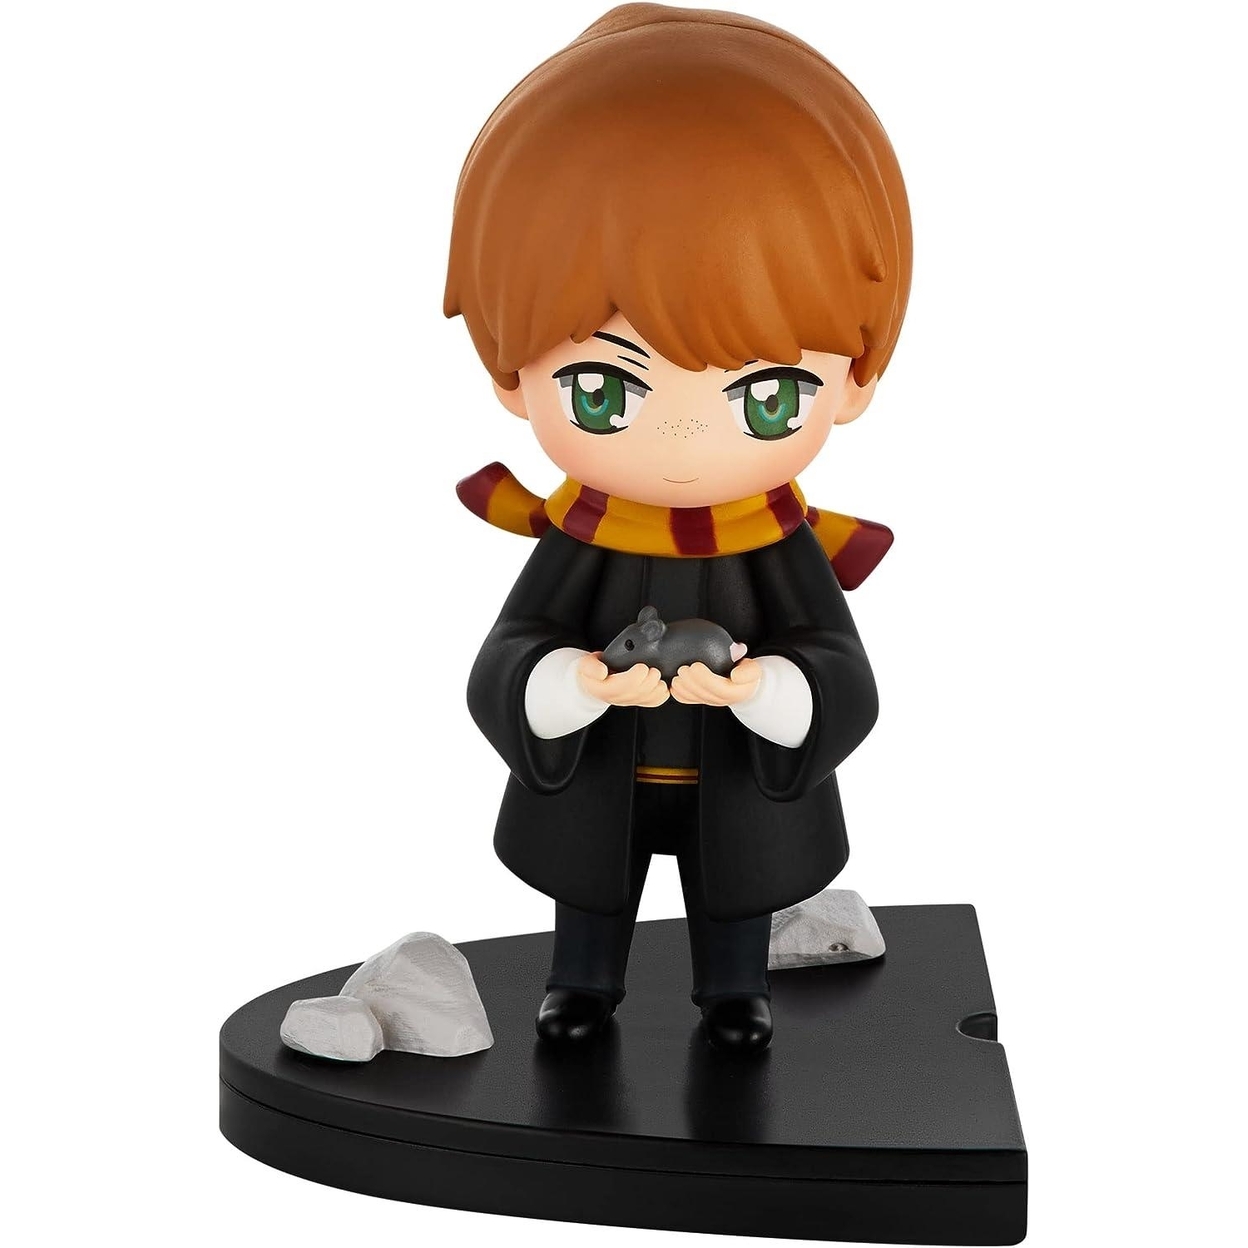 Ron Weasley Ink Stamper Figure Harry Potter Character Collectible 3.5 PMI International